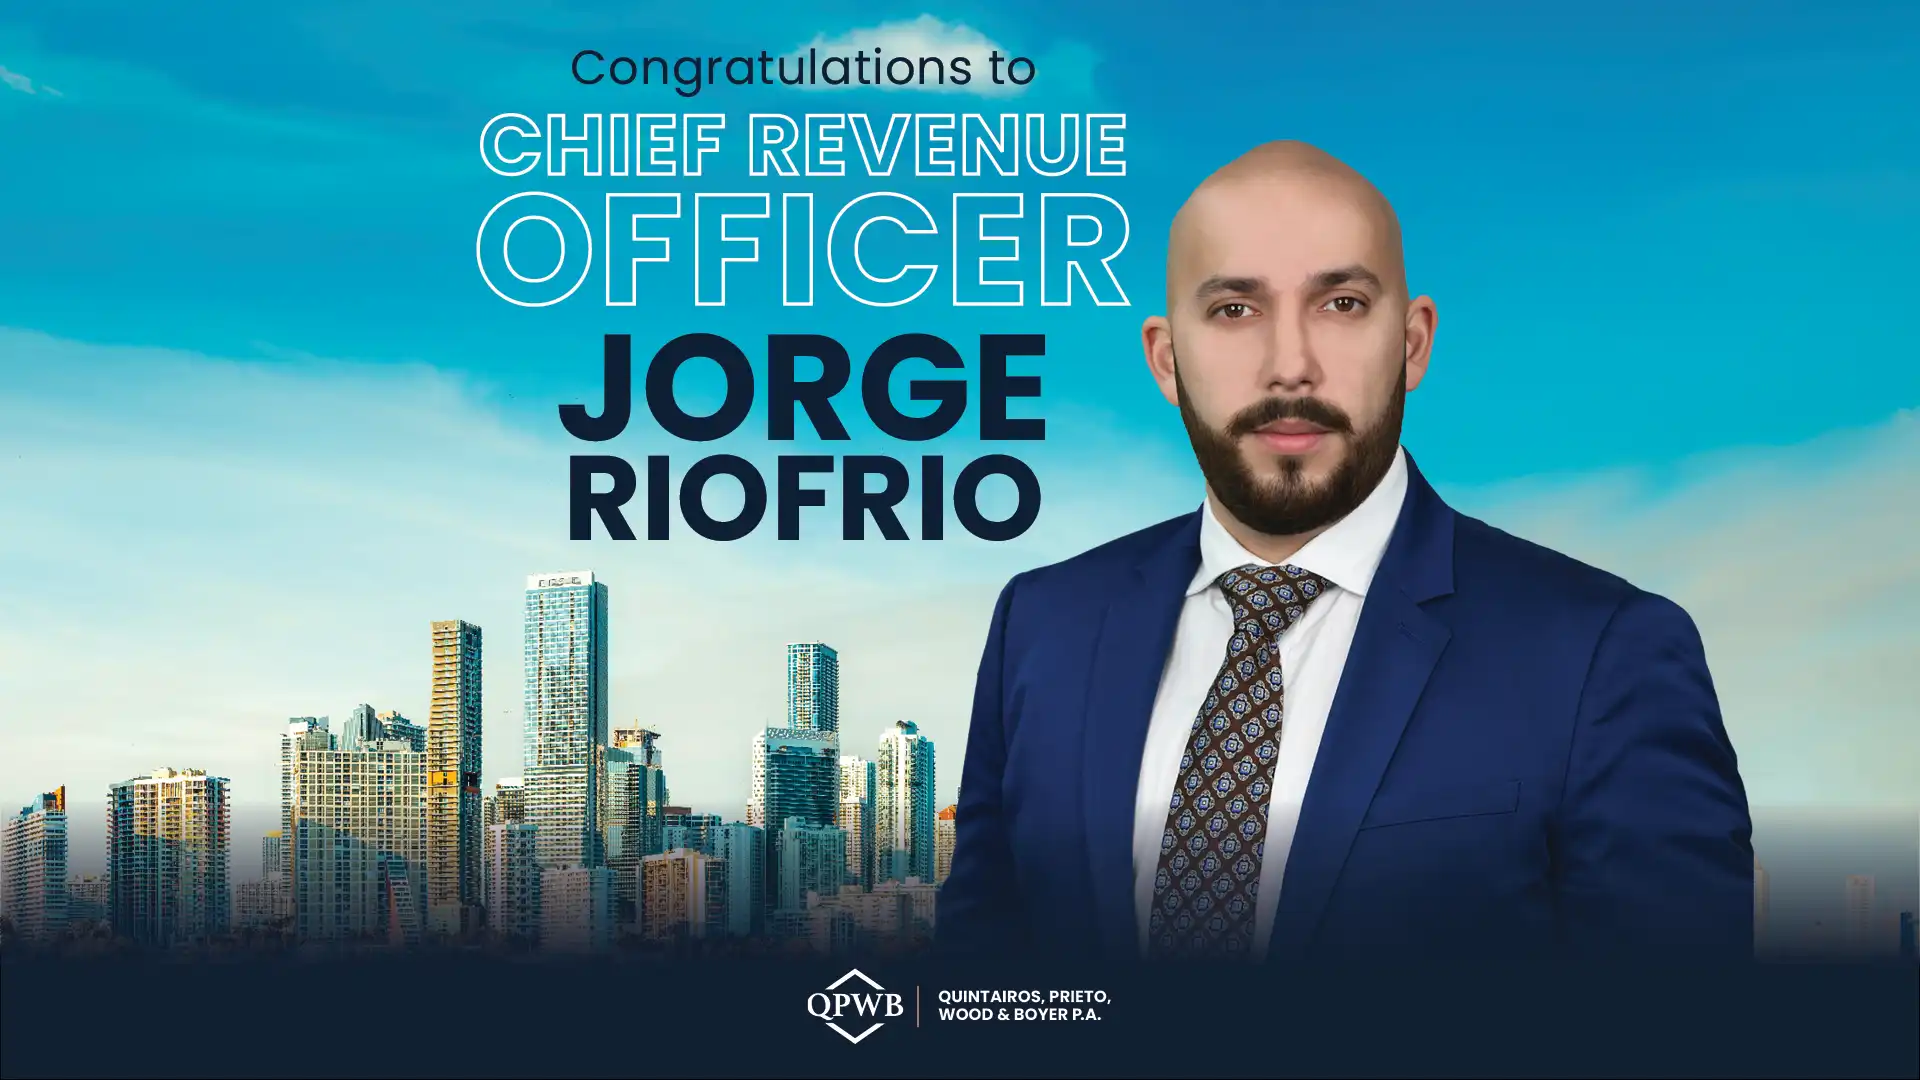 QPWB Elevates Jorge Riofrio to Chief Revenue Officer as Latest Update to Growing Corporate Management Team